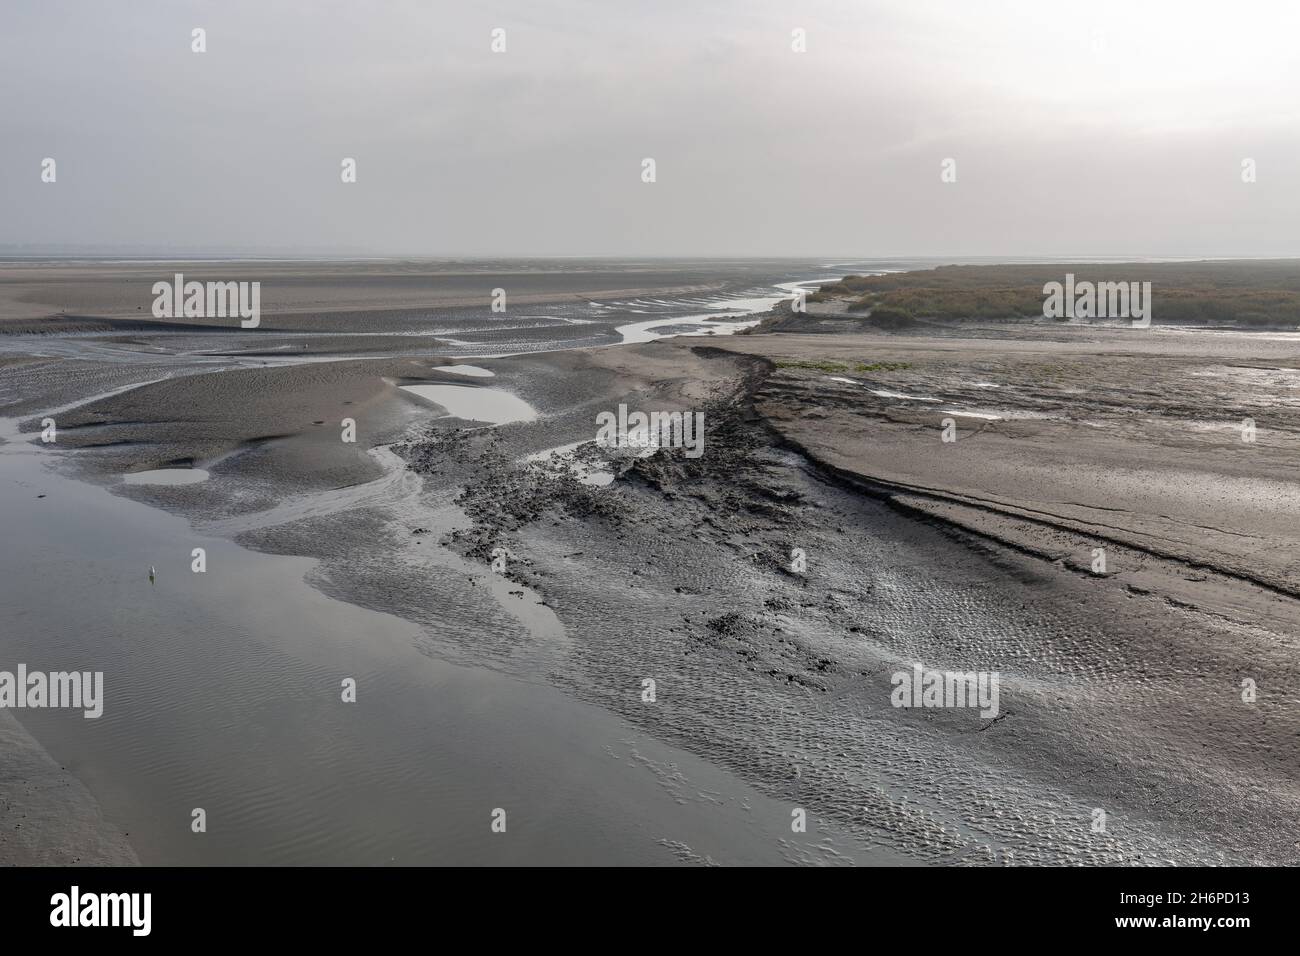 View from the Pointe du Hourdel on the Somme estuary at low tide. Bay of Somme, France Stock Photo